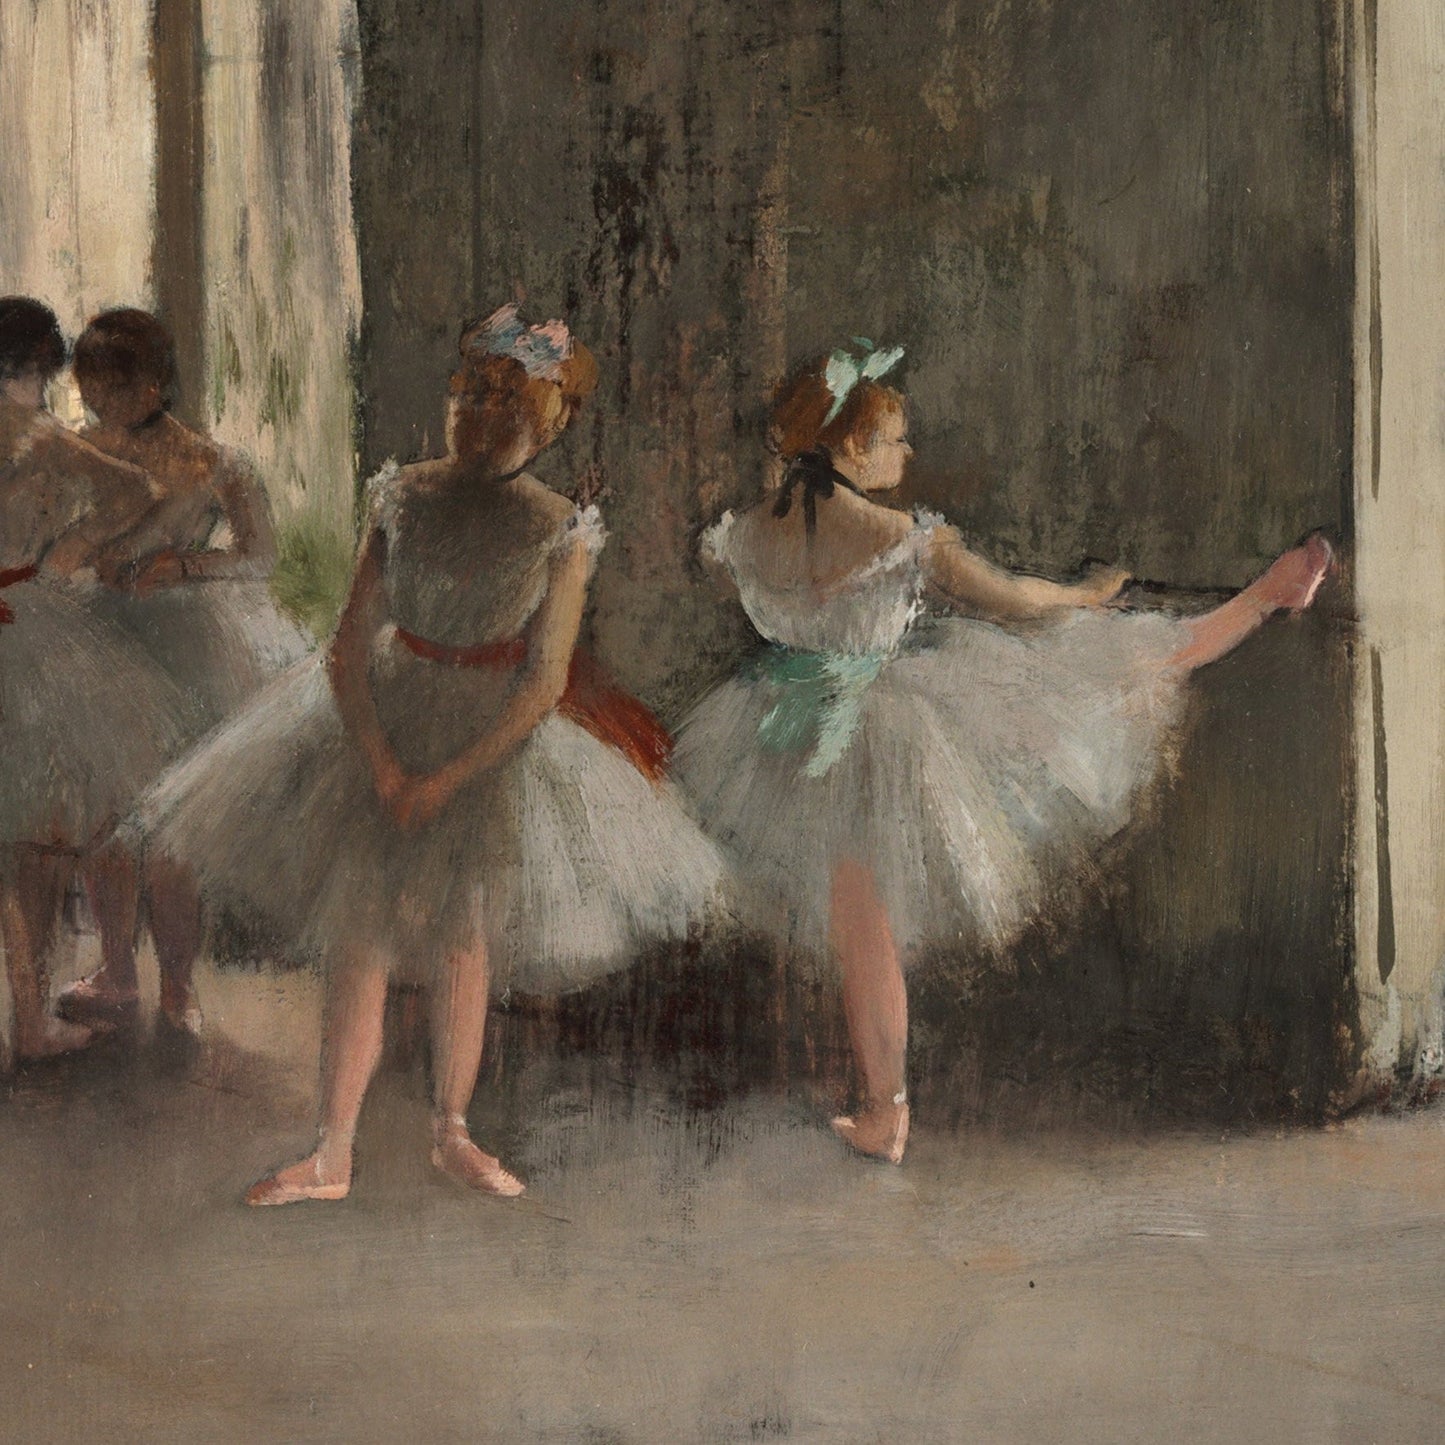 The Rehearsal by Edgar Degas, 3d Printed with texture and brush strokes looks like original oil-painting, code:374